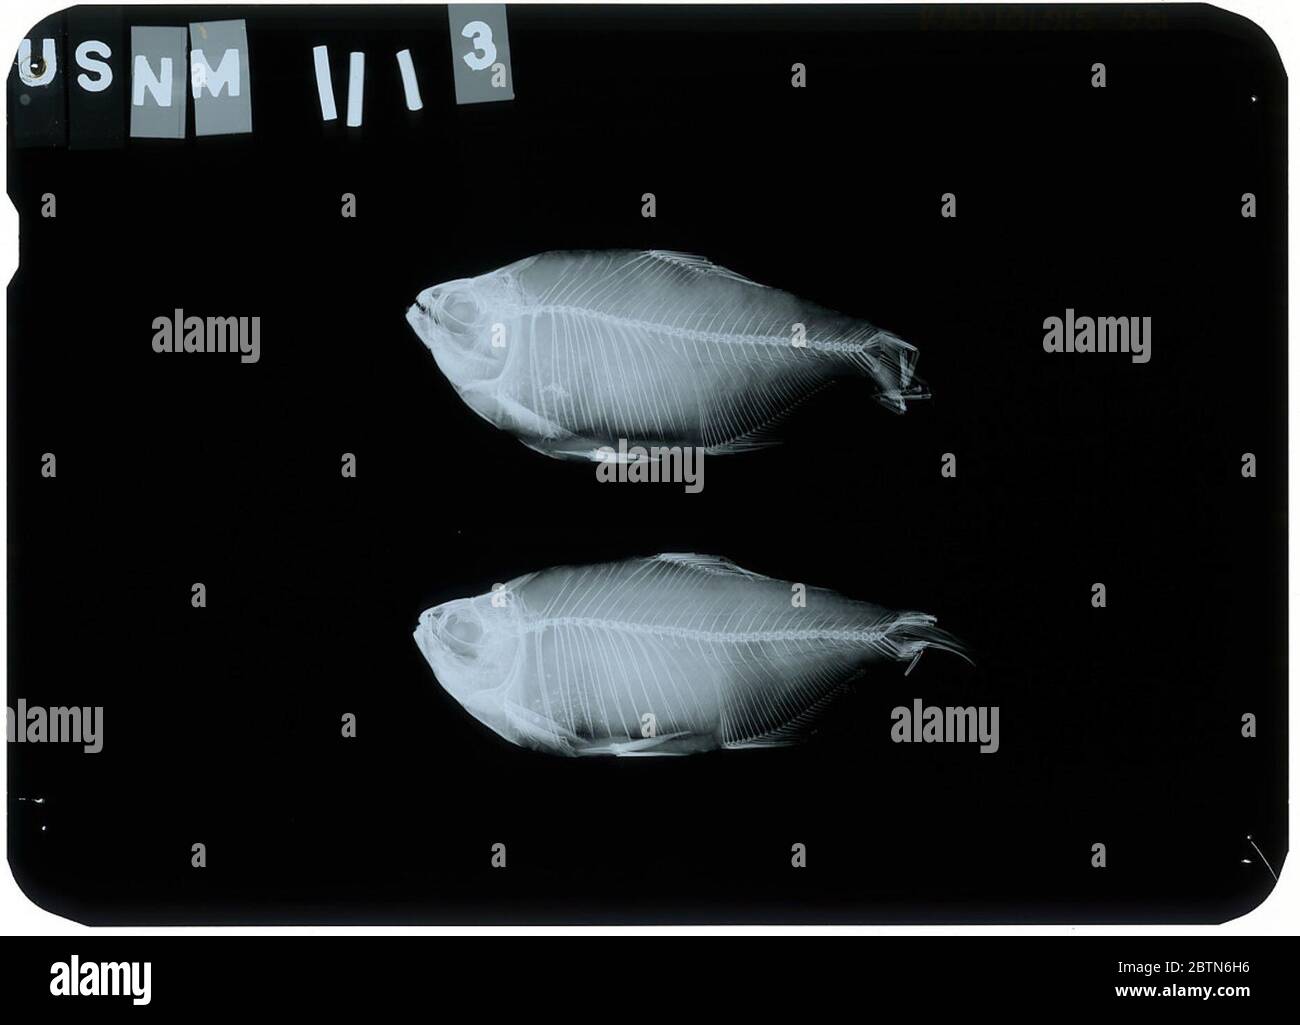 Poecilurichthys brevoortii. Radiograph is of a type; The Smithsonian NMNH Division of Fishes uses the convention of maintaining the original species name for type specimens designated at the time of description. The currently accepted name for this species is Astyanax bimaculatus.24 Oct 20181 Stock Photo